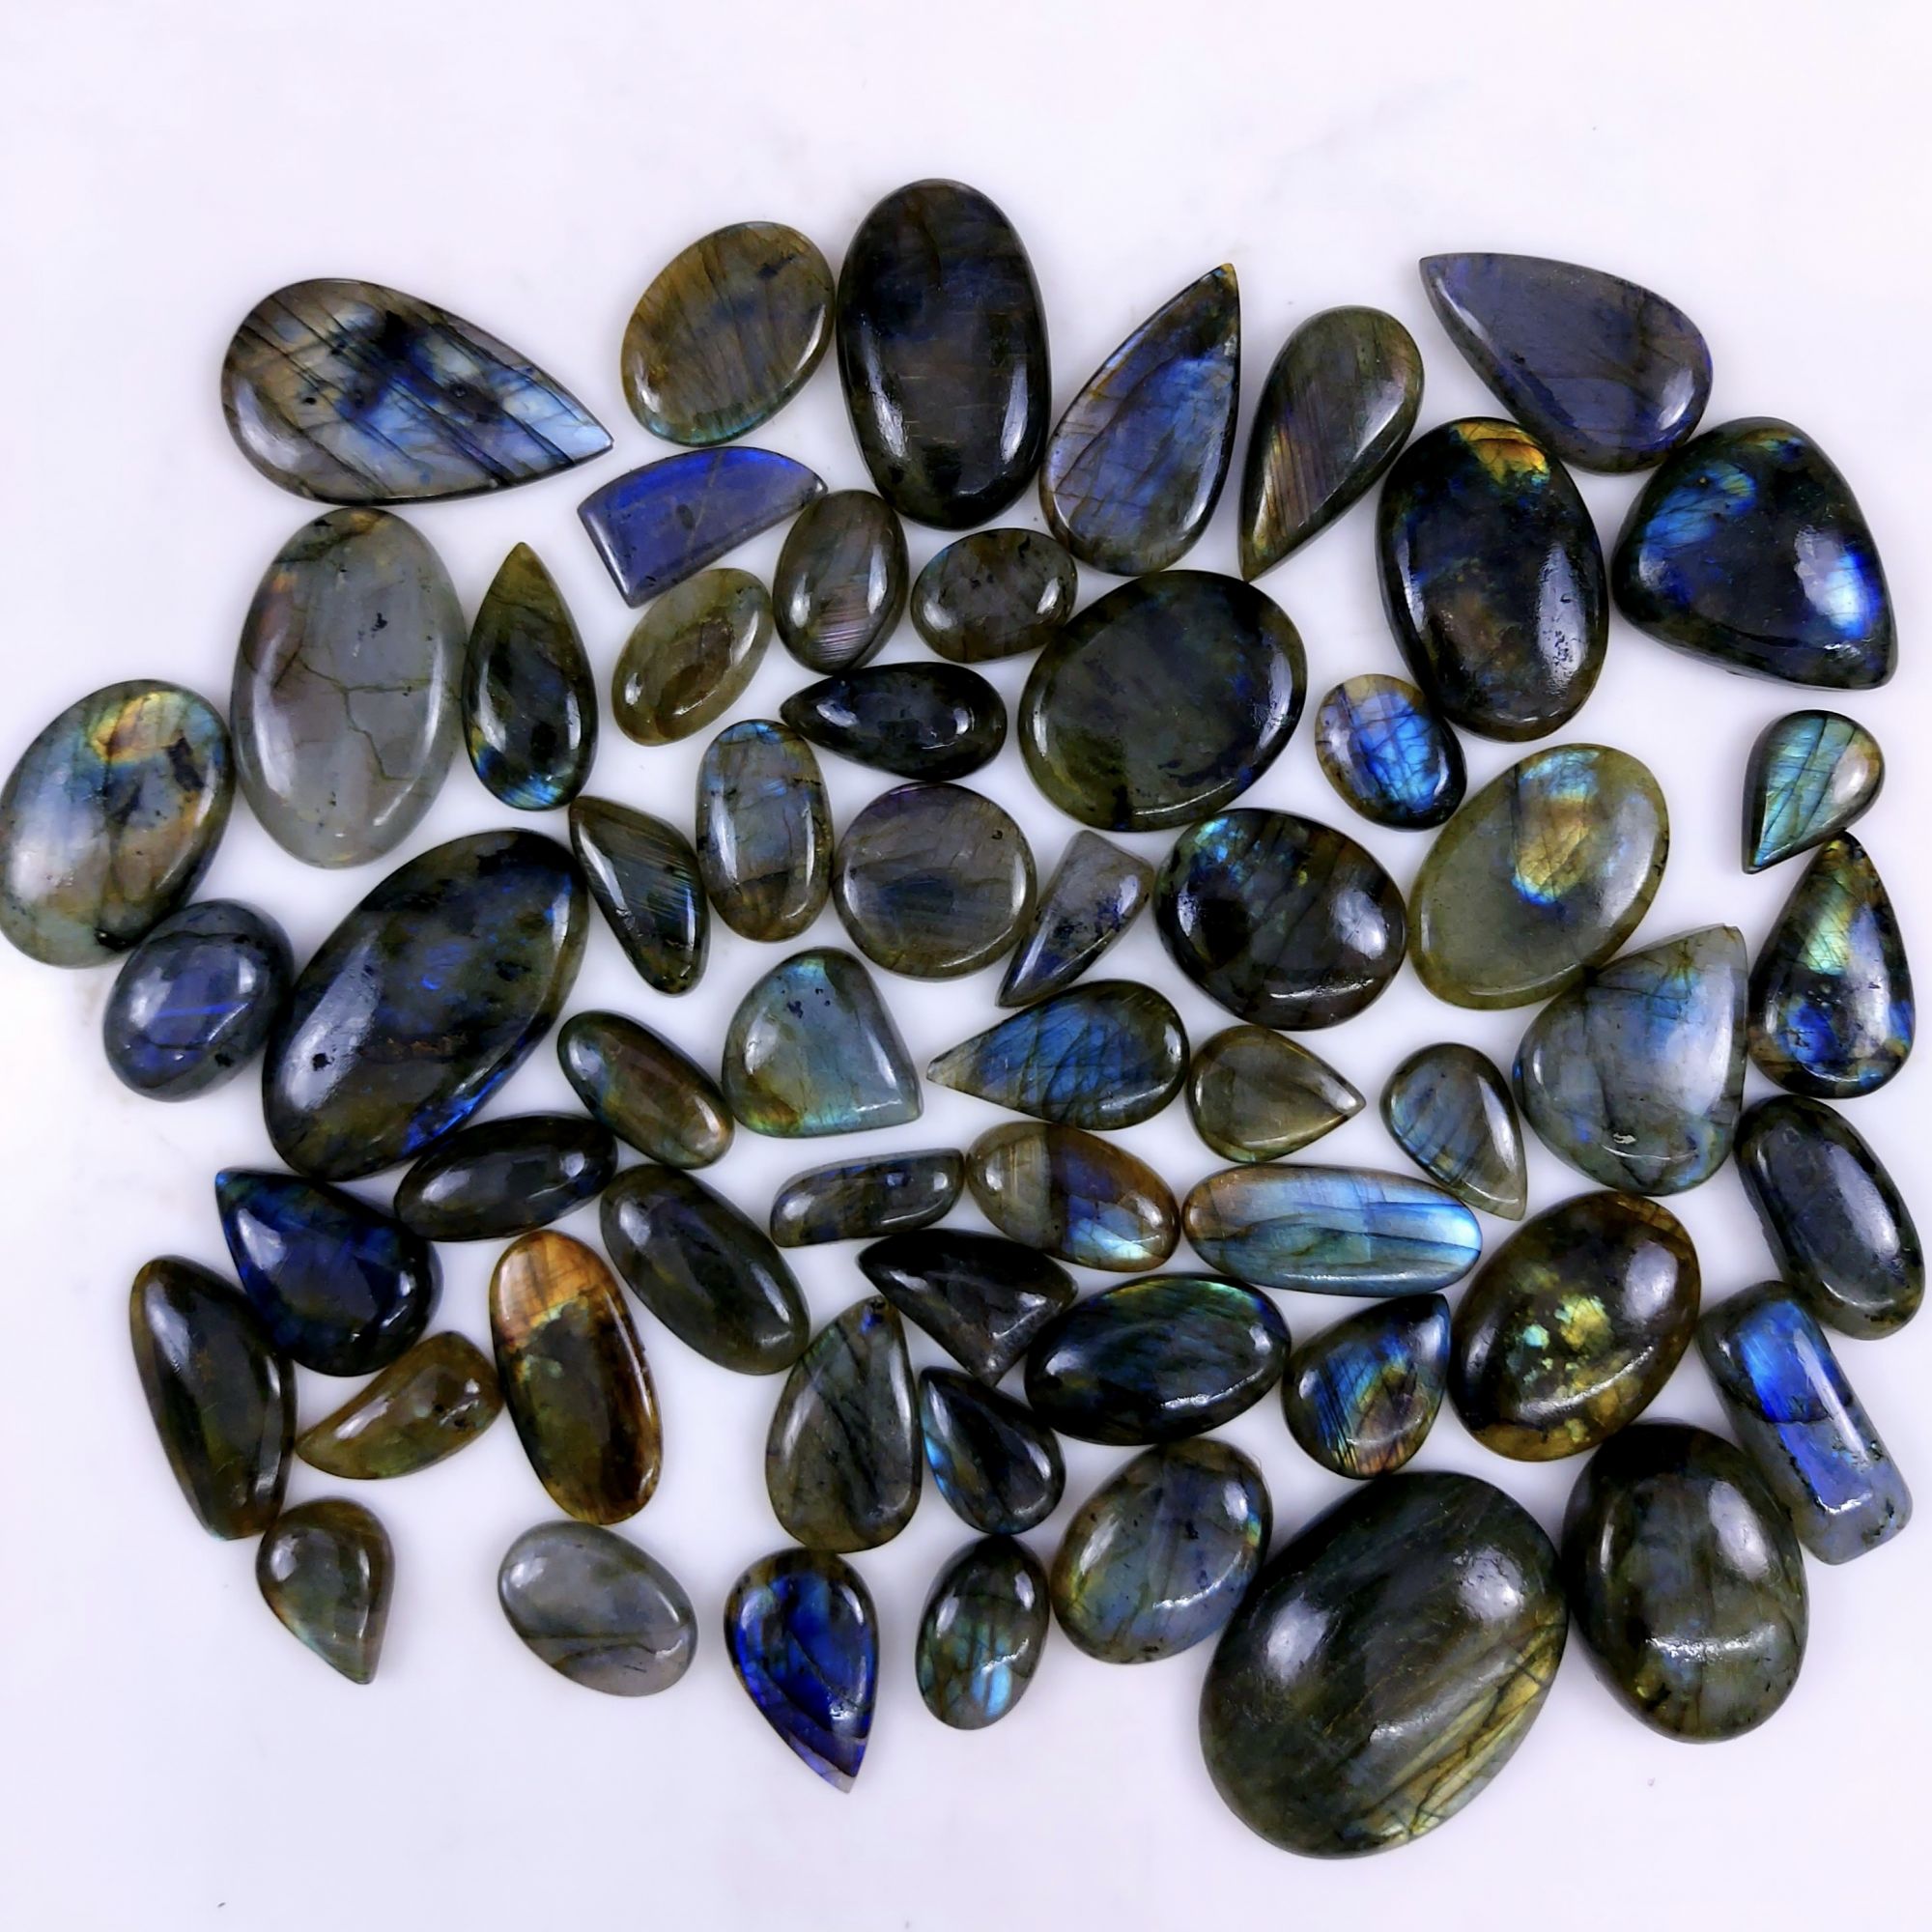 58pc 1913Cts Labradorite Cabochon Multifire Healing Crystal For Jewelry Supplies, Labradorite Necklace Handmade Wire Wrapped Gemstone Pendant 48x35 20x14mm#6374